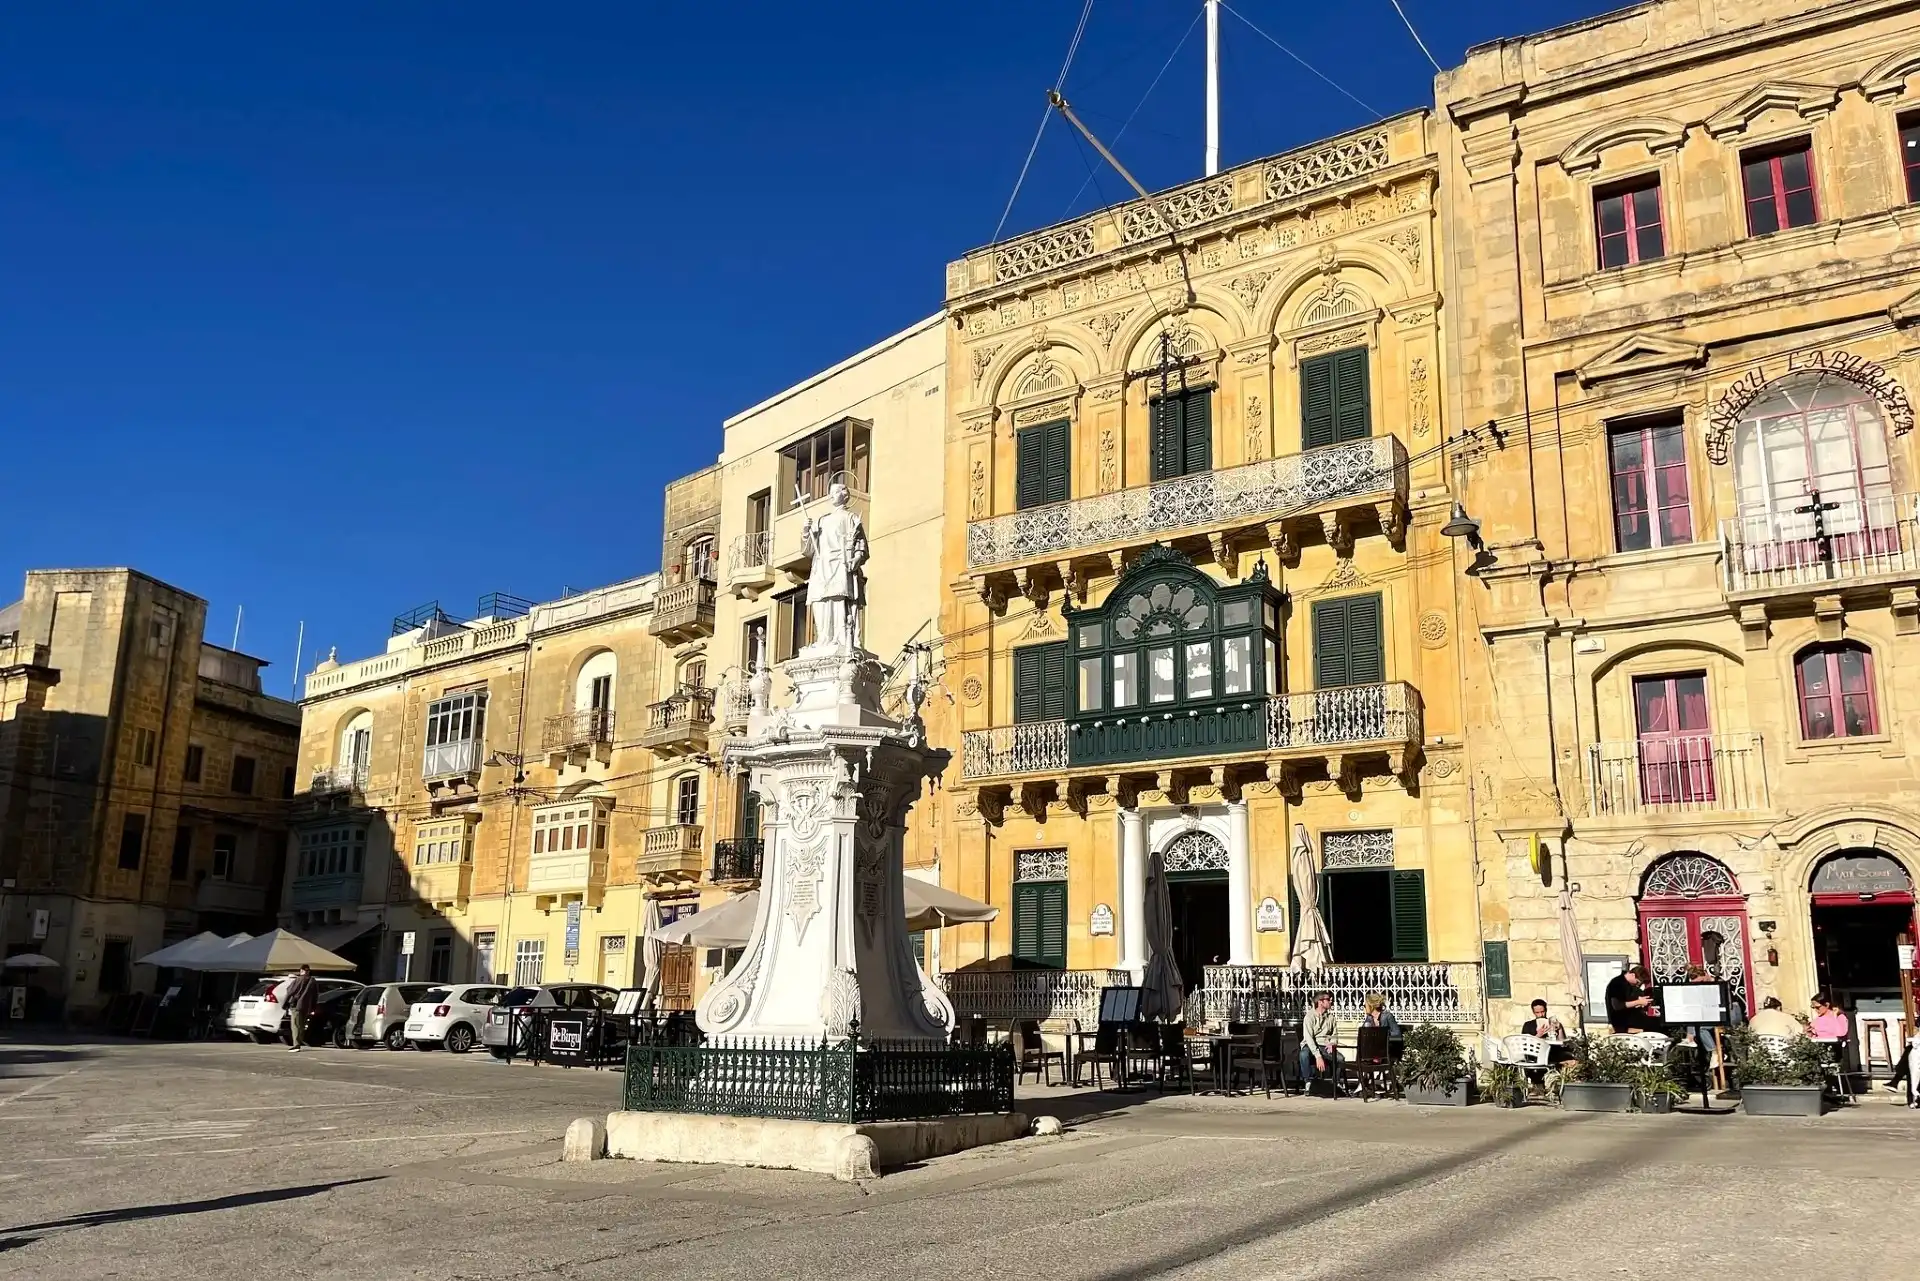 Plaza in one of The Three Cities Malta